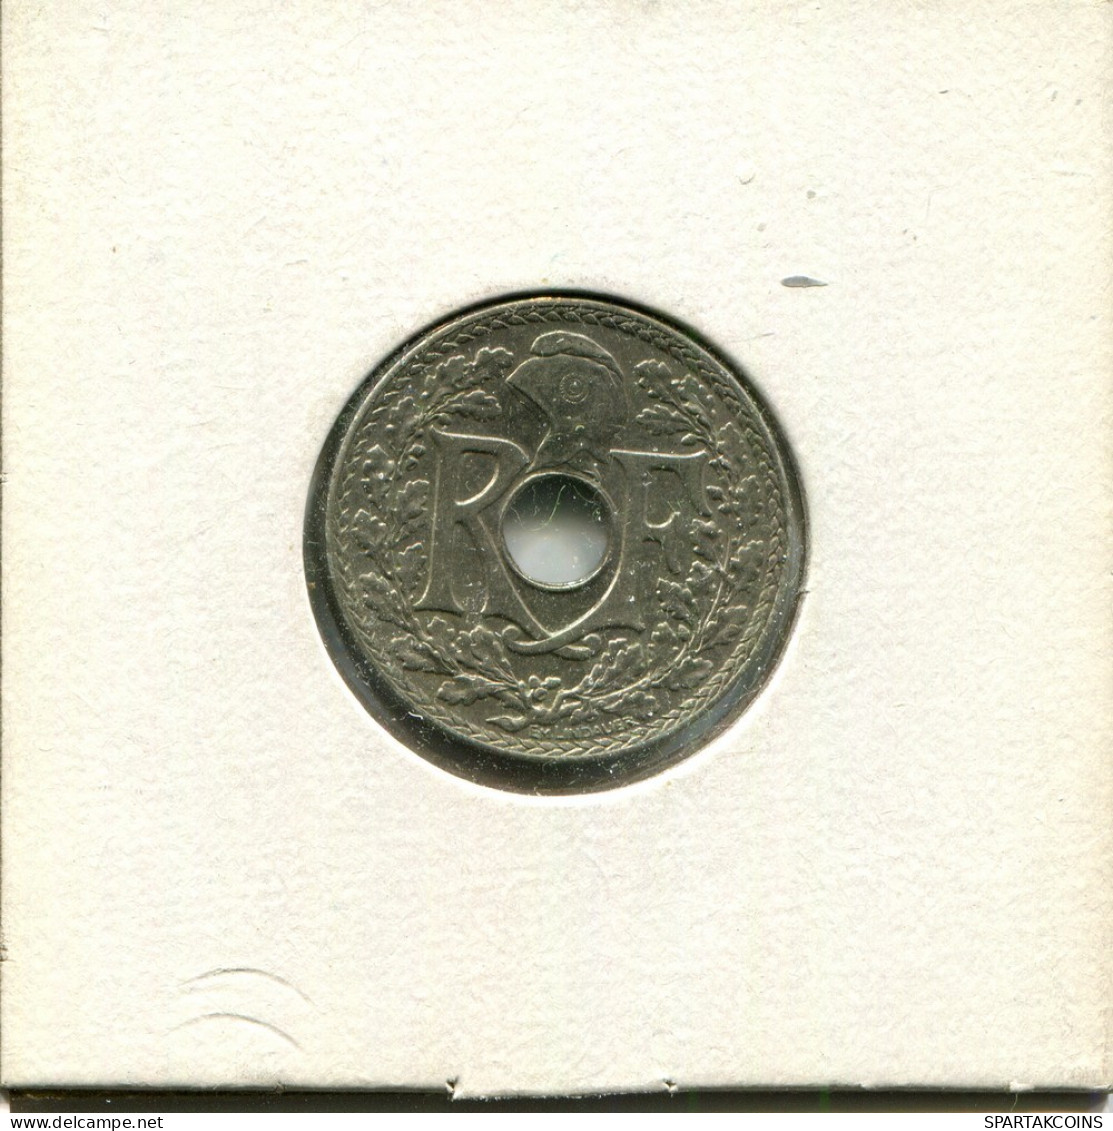 10 CENTIMES 1939 FRANCE Coin French Coin #BA729.U.A - 10 Centimes